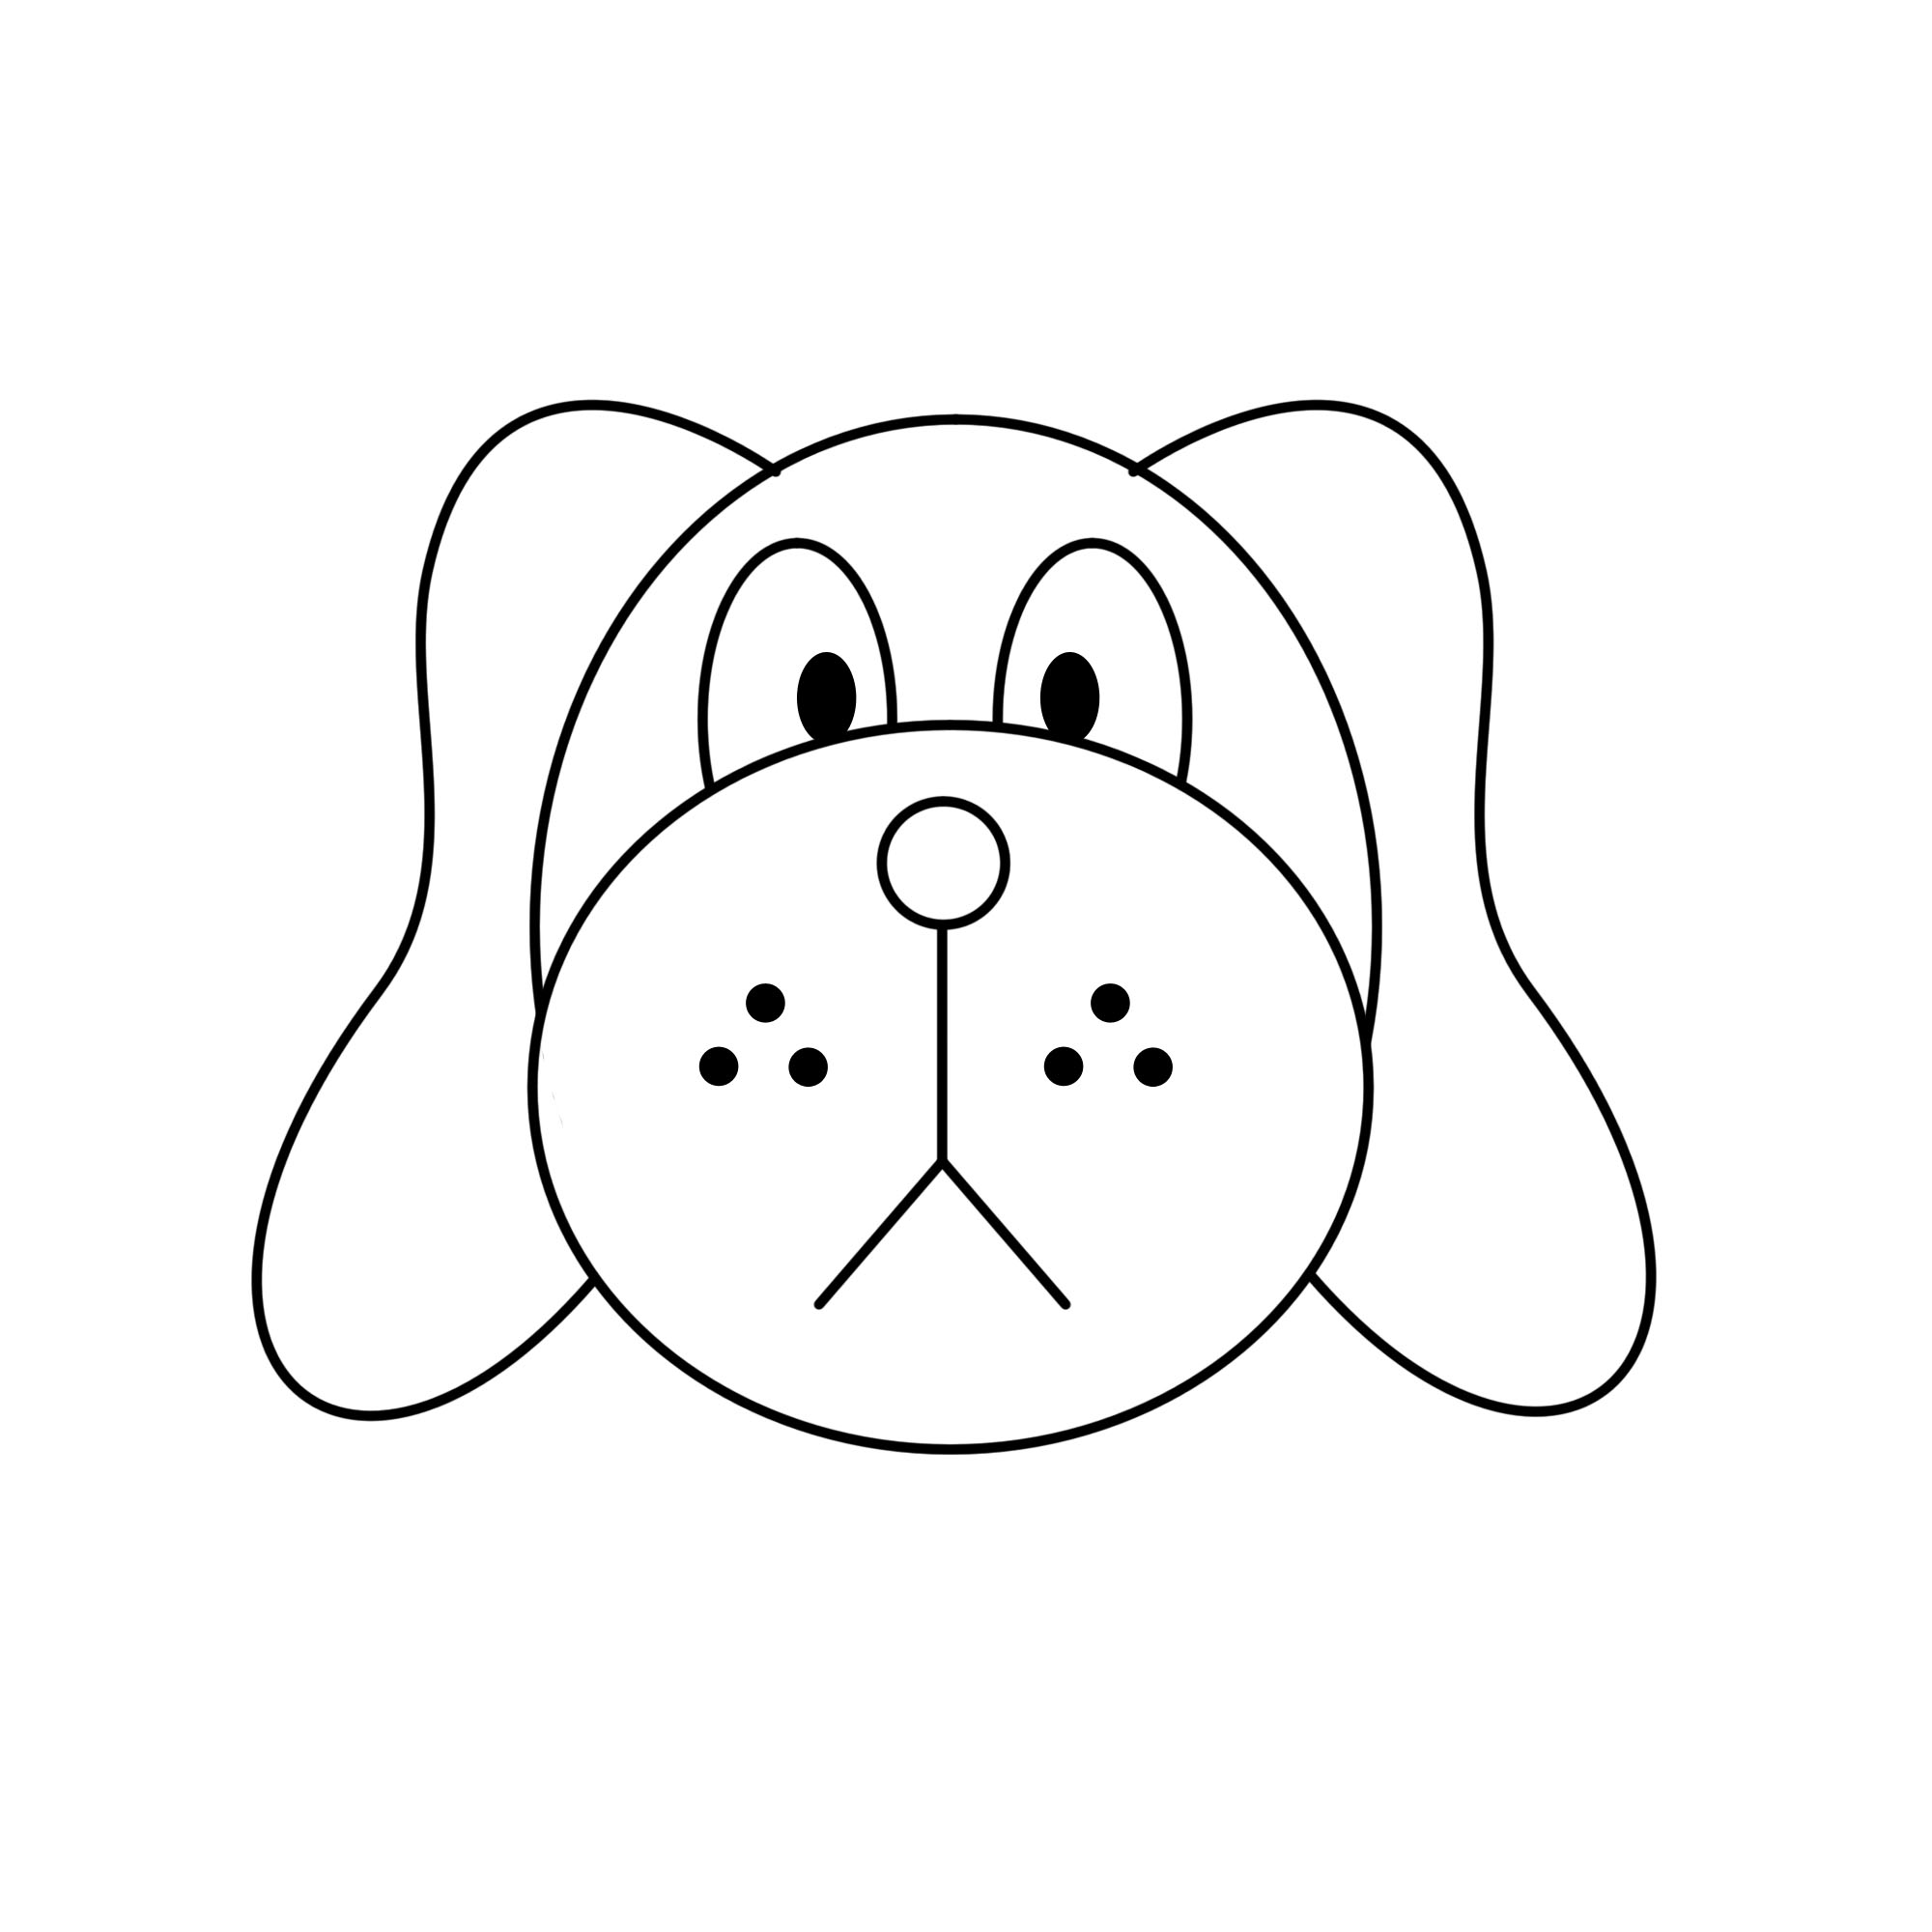 Free Simple Line Drawing Of A Dog, Download Free Clip Art